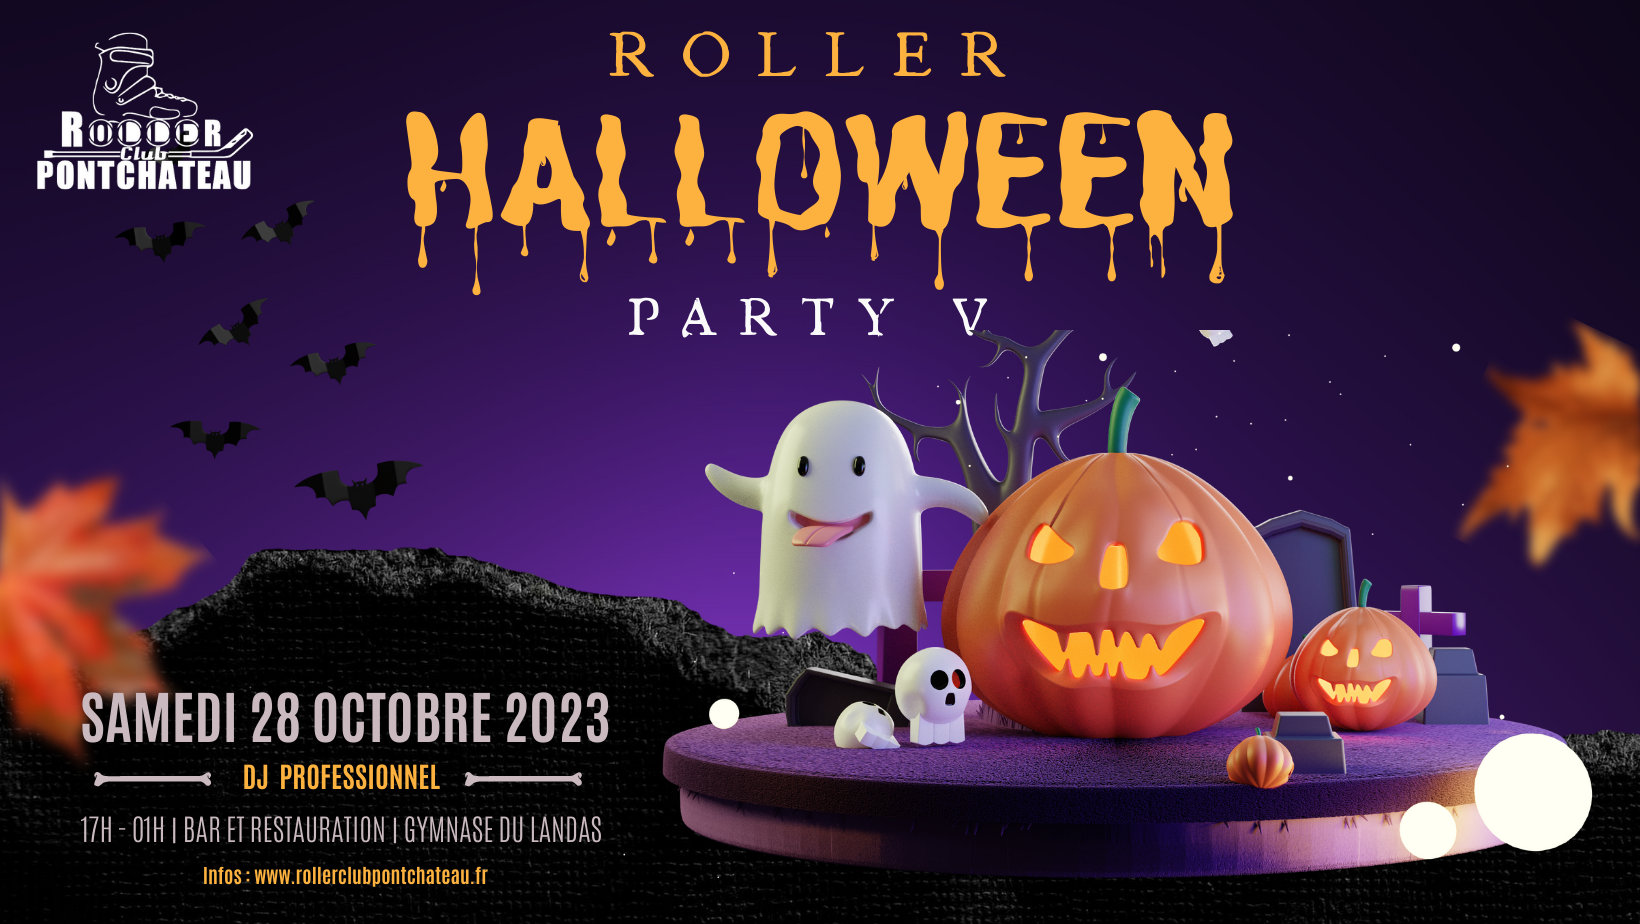 You are currently viewing Roller Halloween Party V : on réserve son samedi !